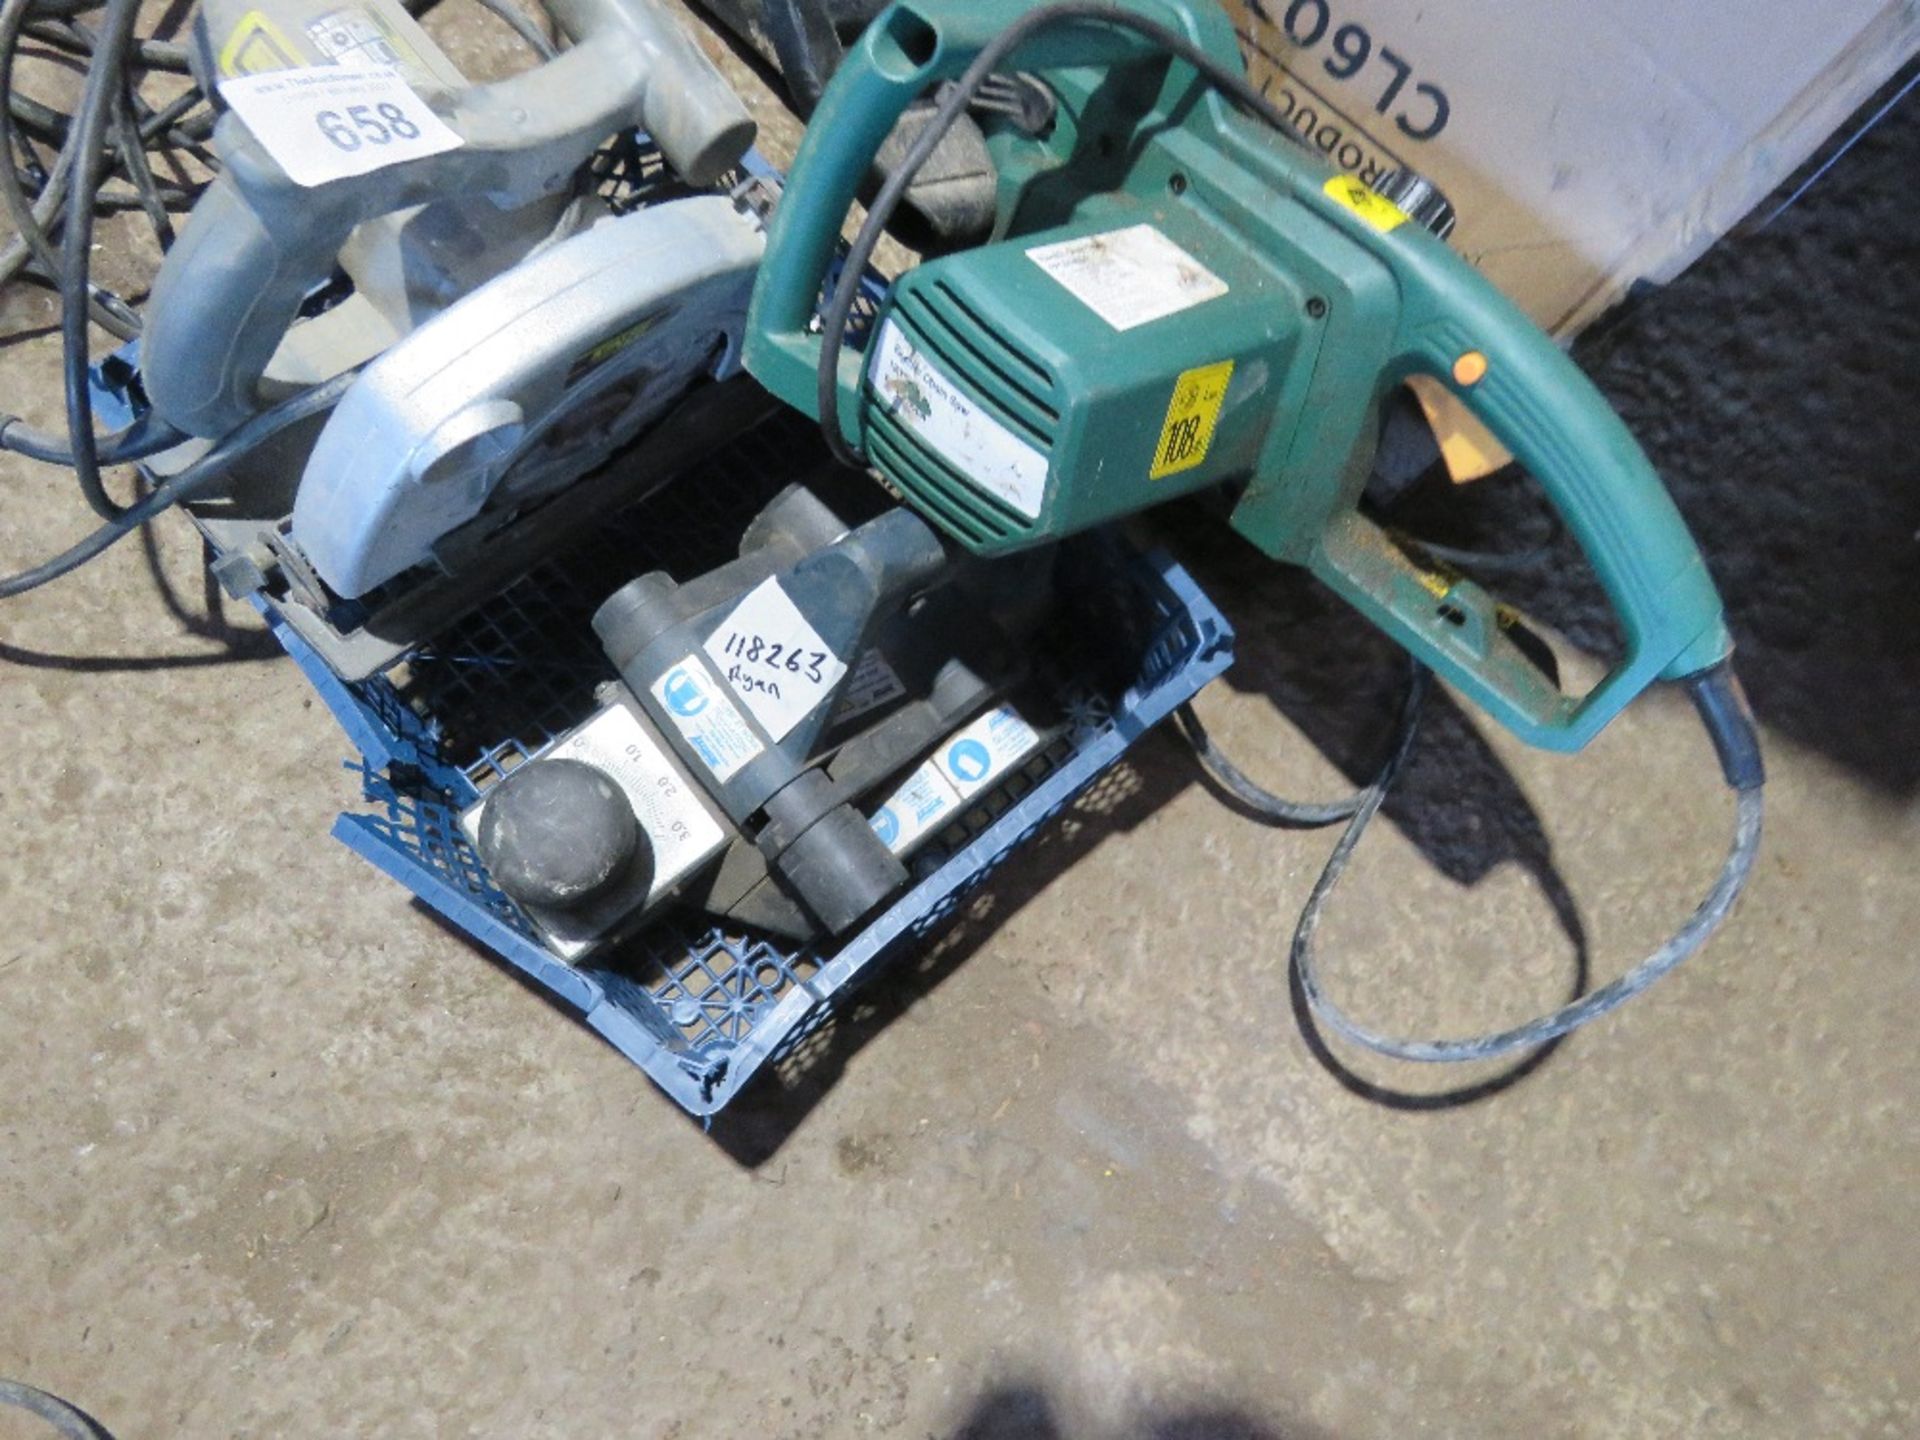 3 X POWER TOOLS, 240 VOLT: PLANER, CIRC SAW PLUS A CHAINSAW. - Image 2 of 2